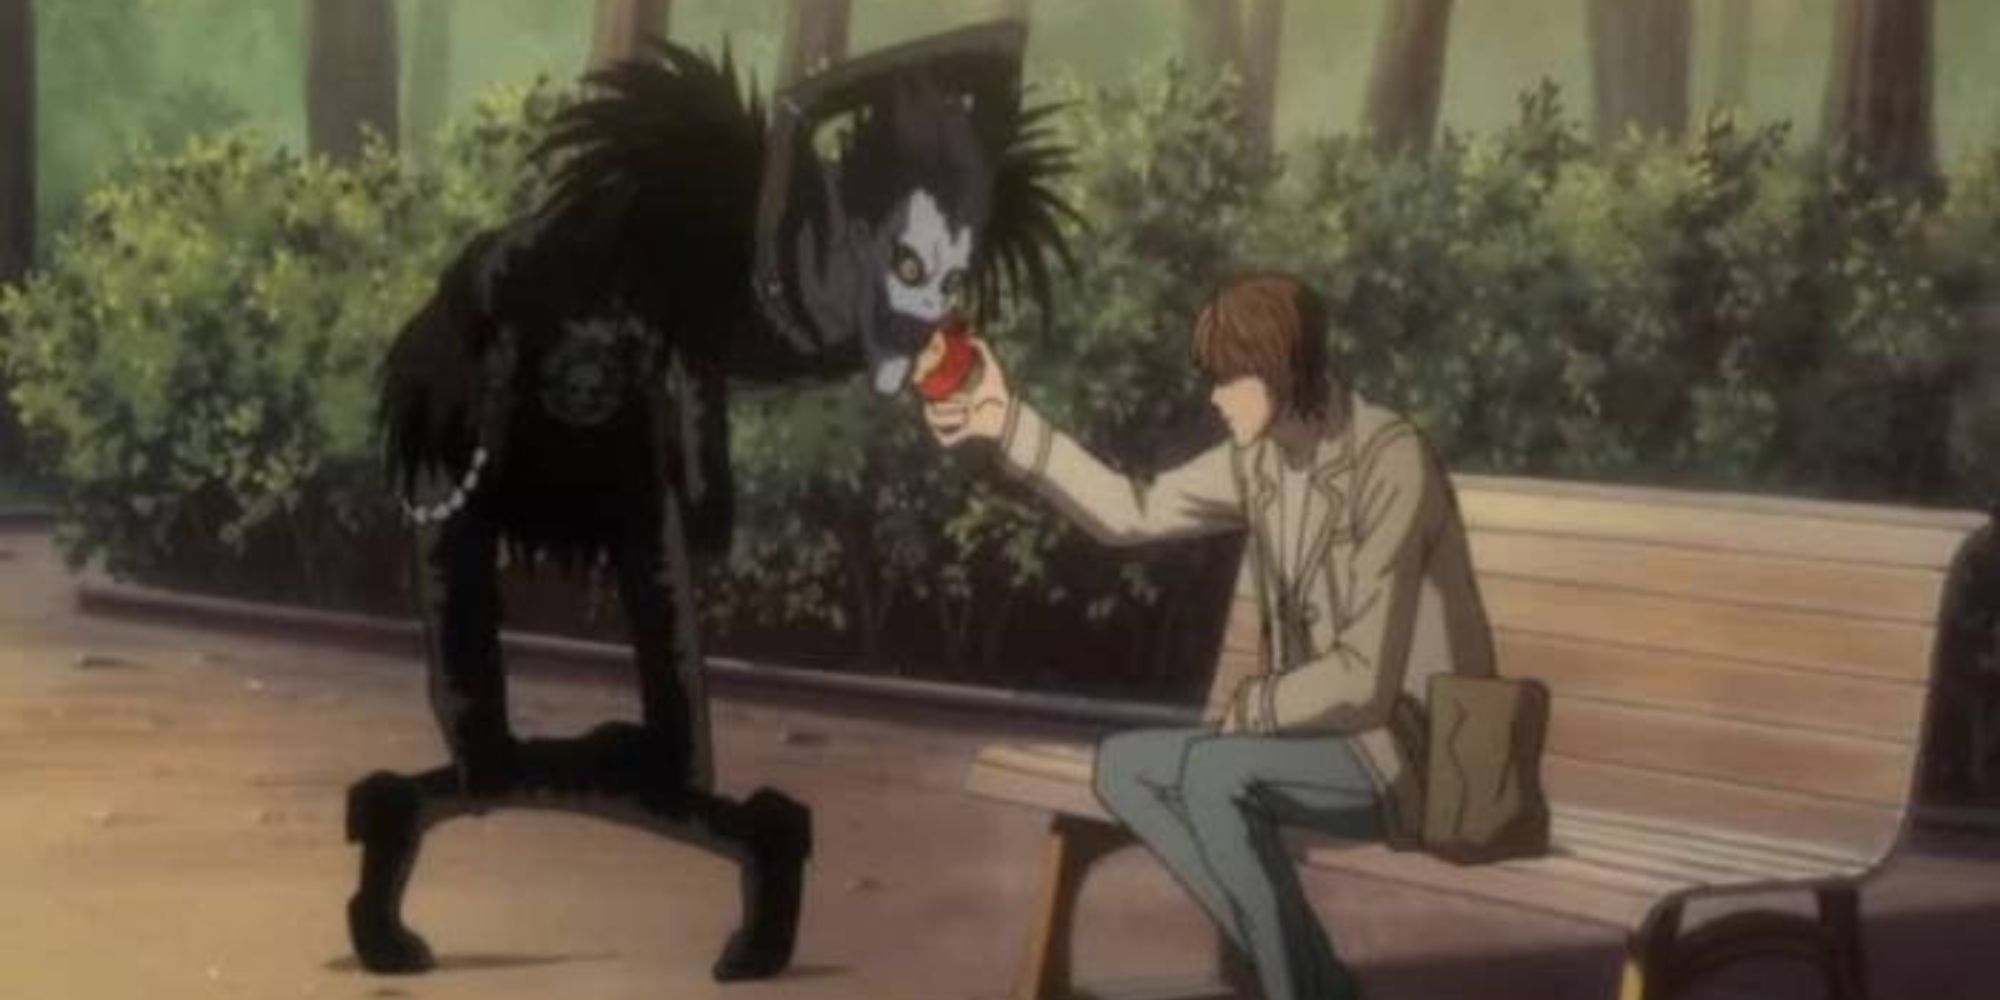 death note anime